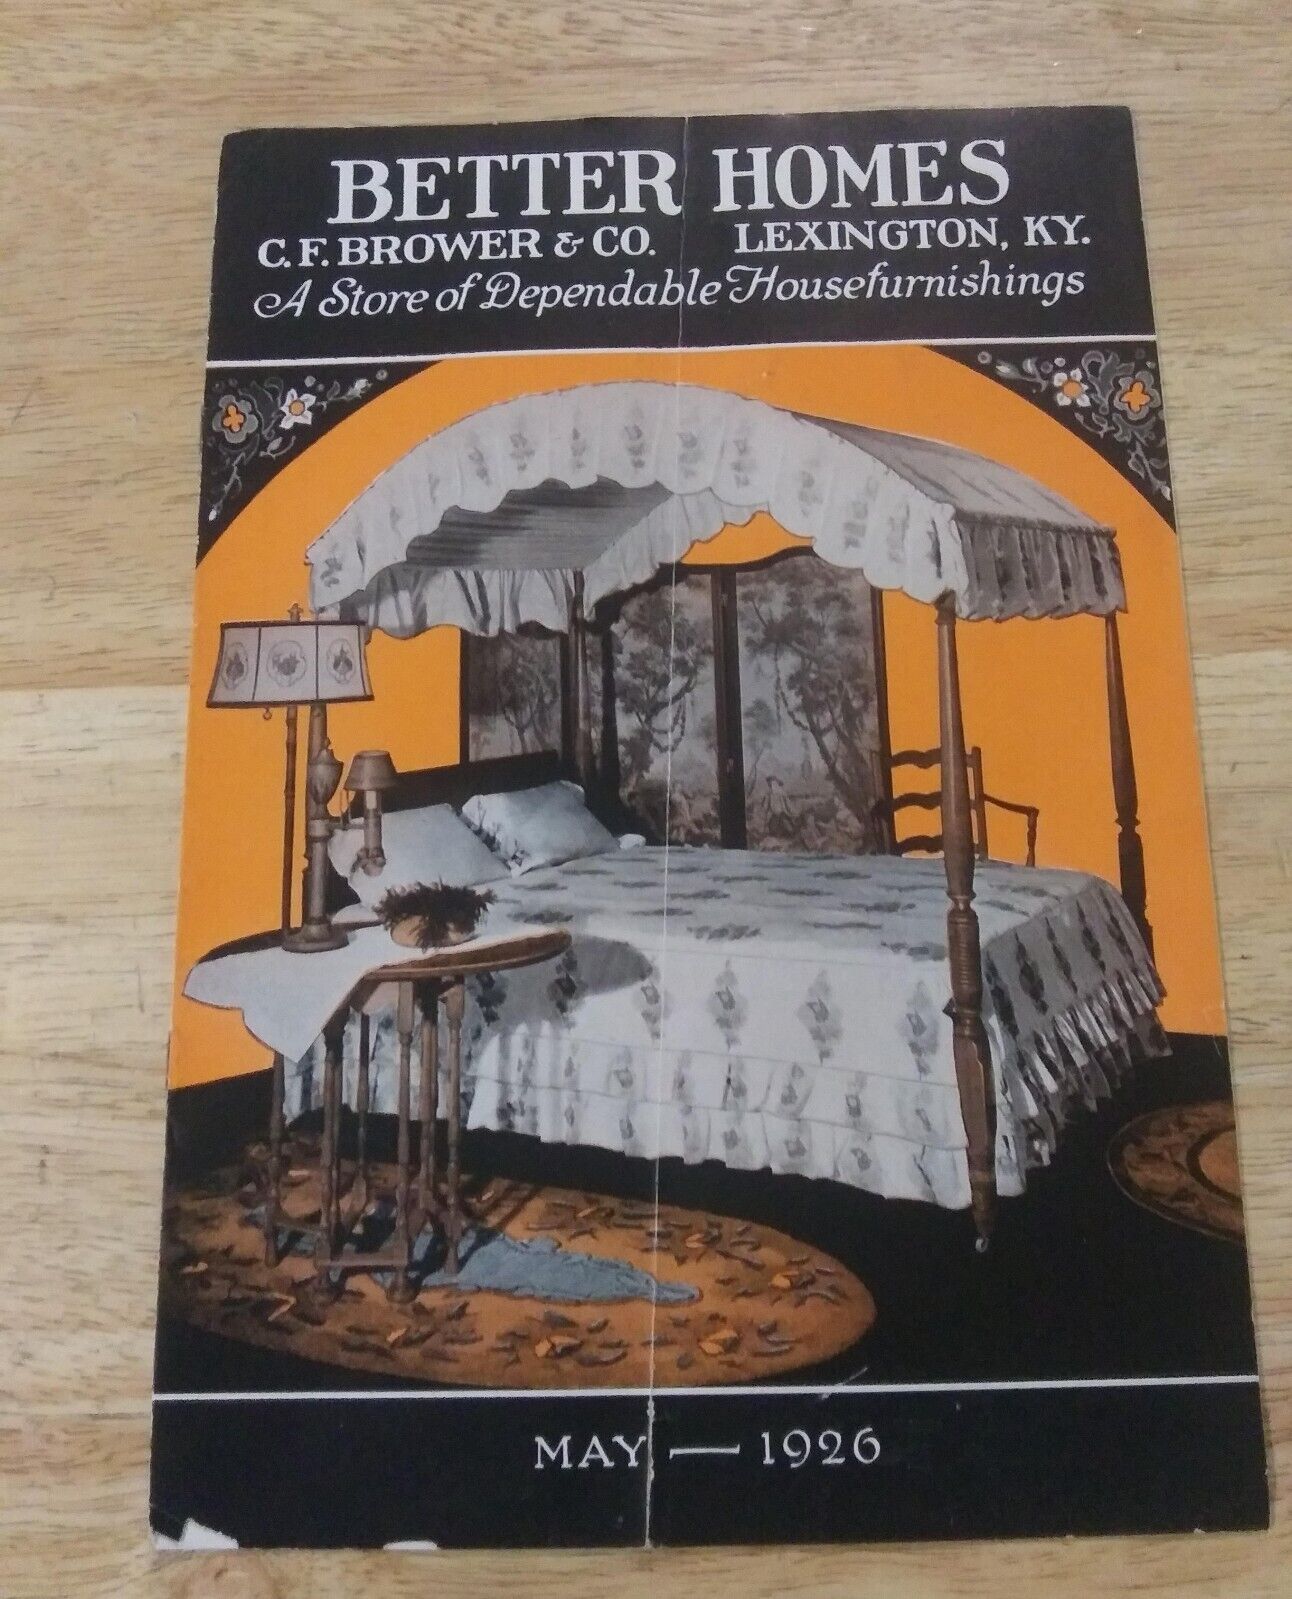 Better Homes C F Brower & Co Lexington KY Ad Catalog May 1926